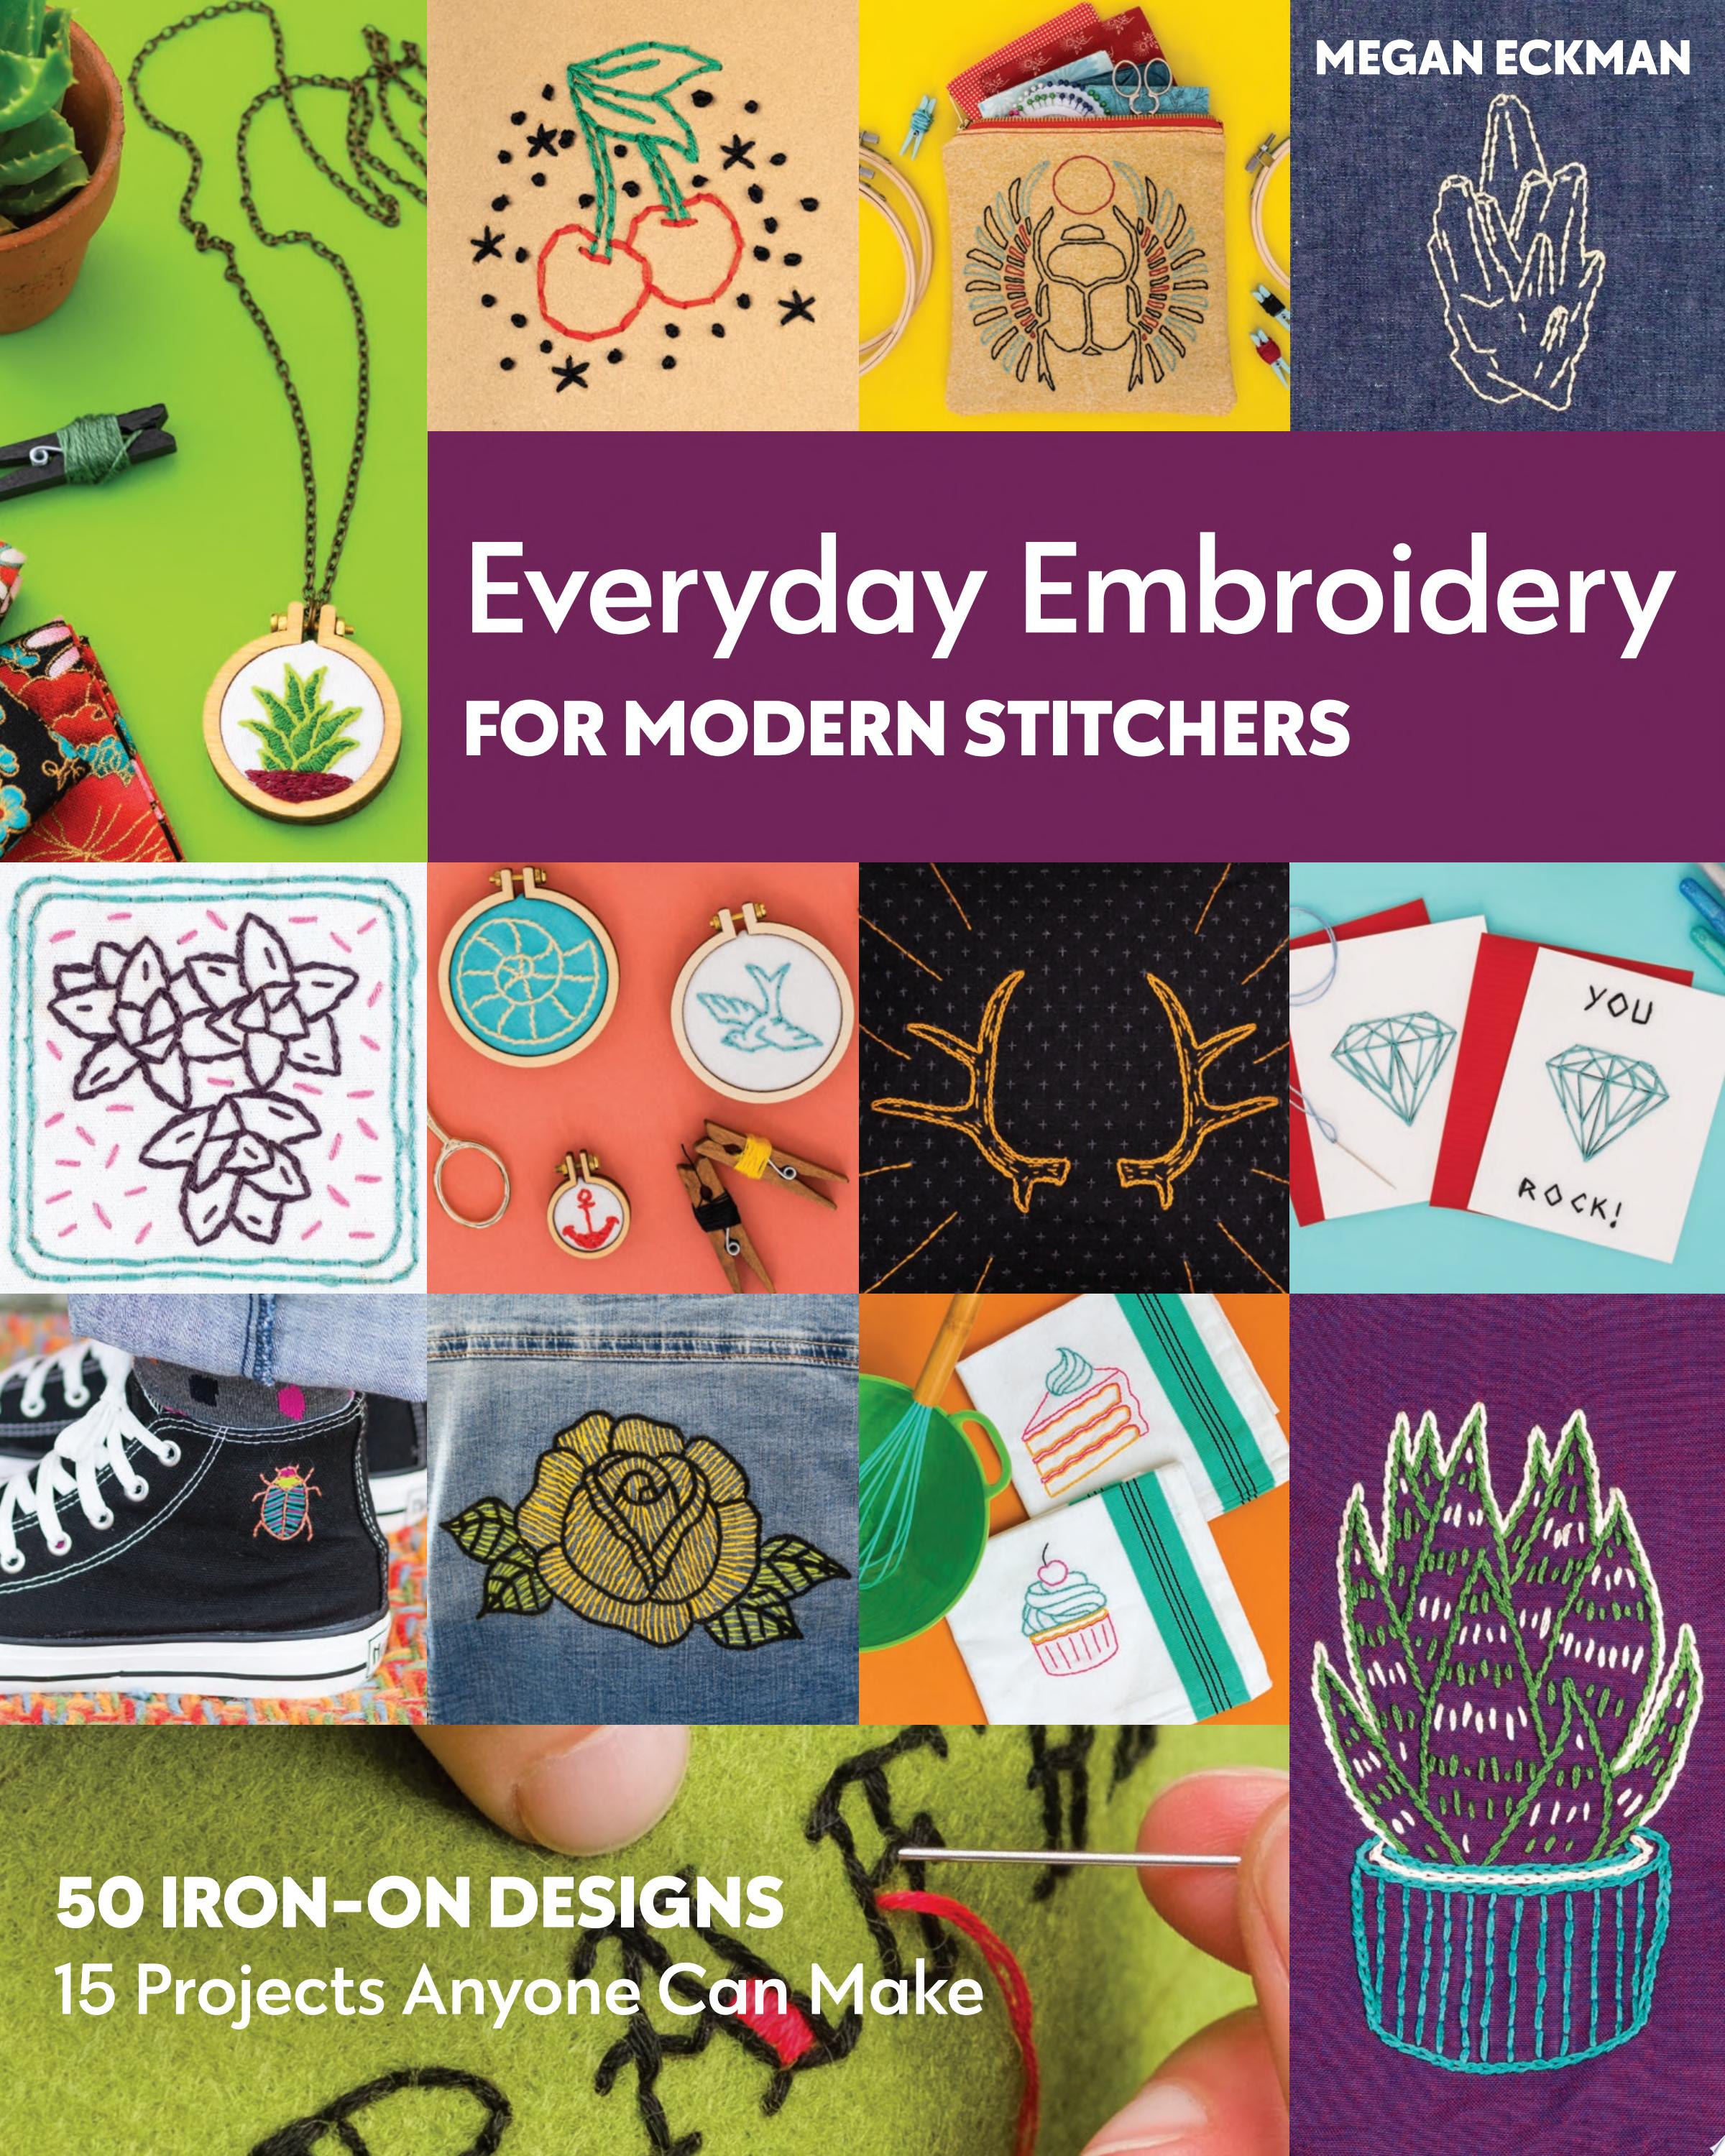 Image for "Everyday Embroidery for Modern Stitchers"